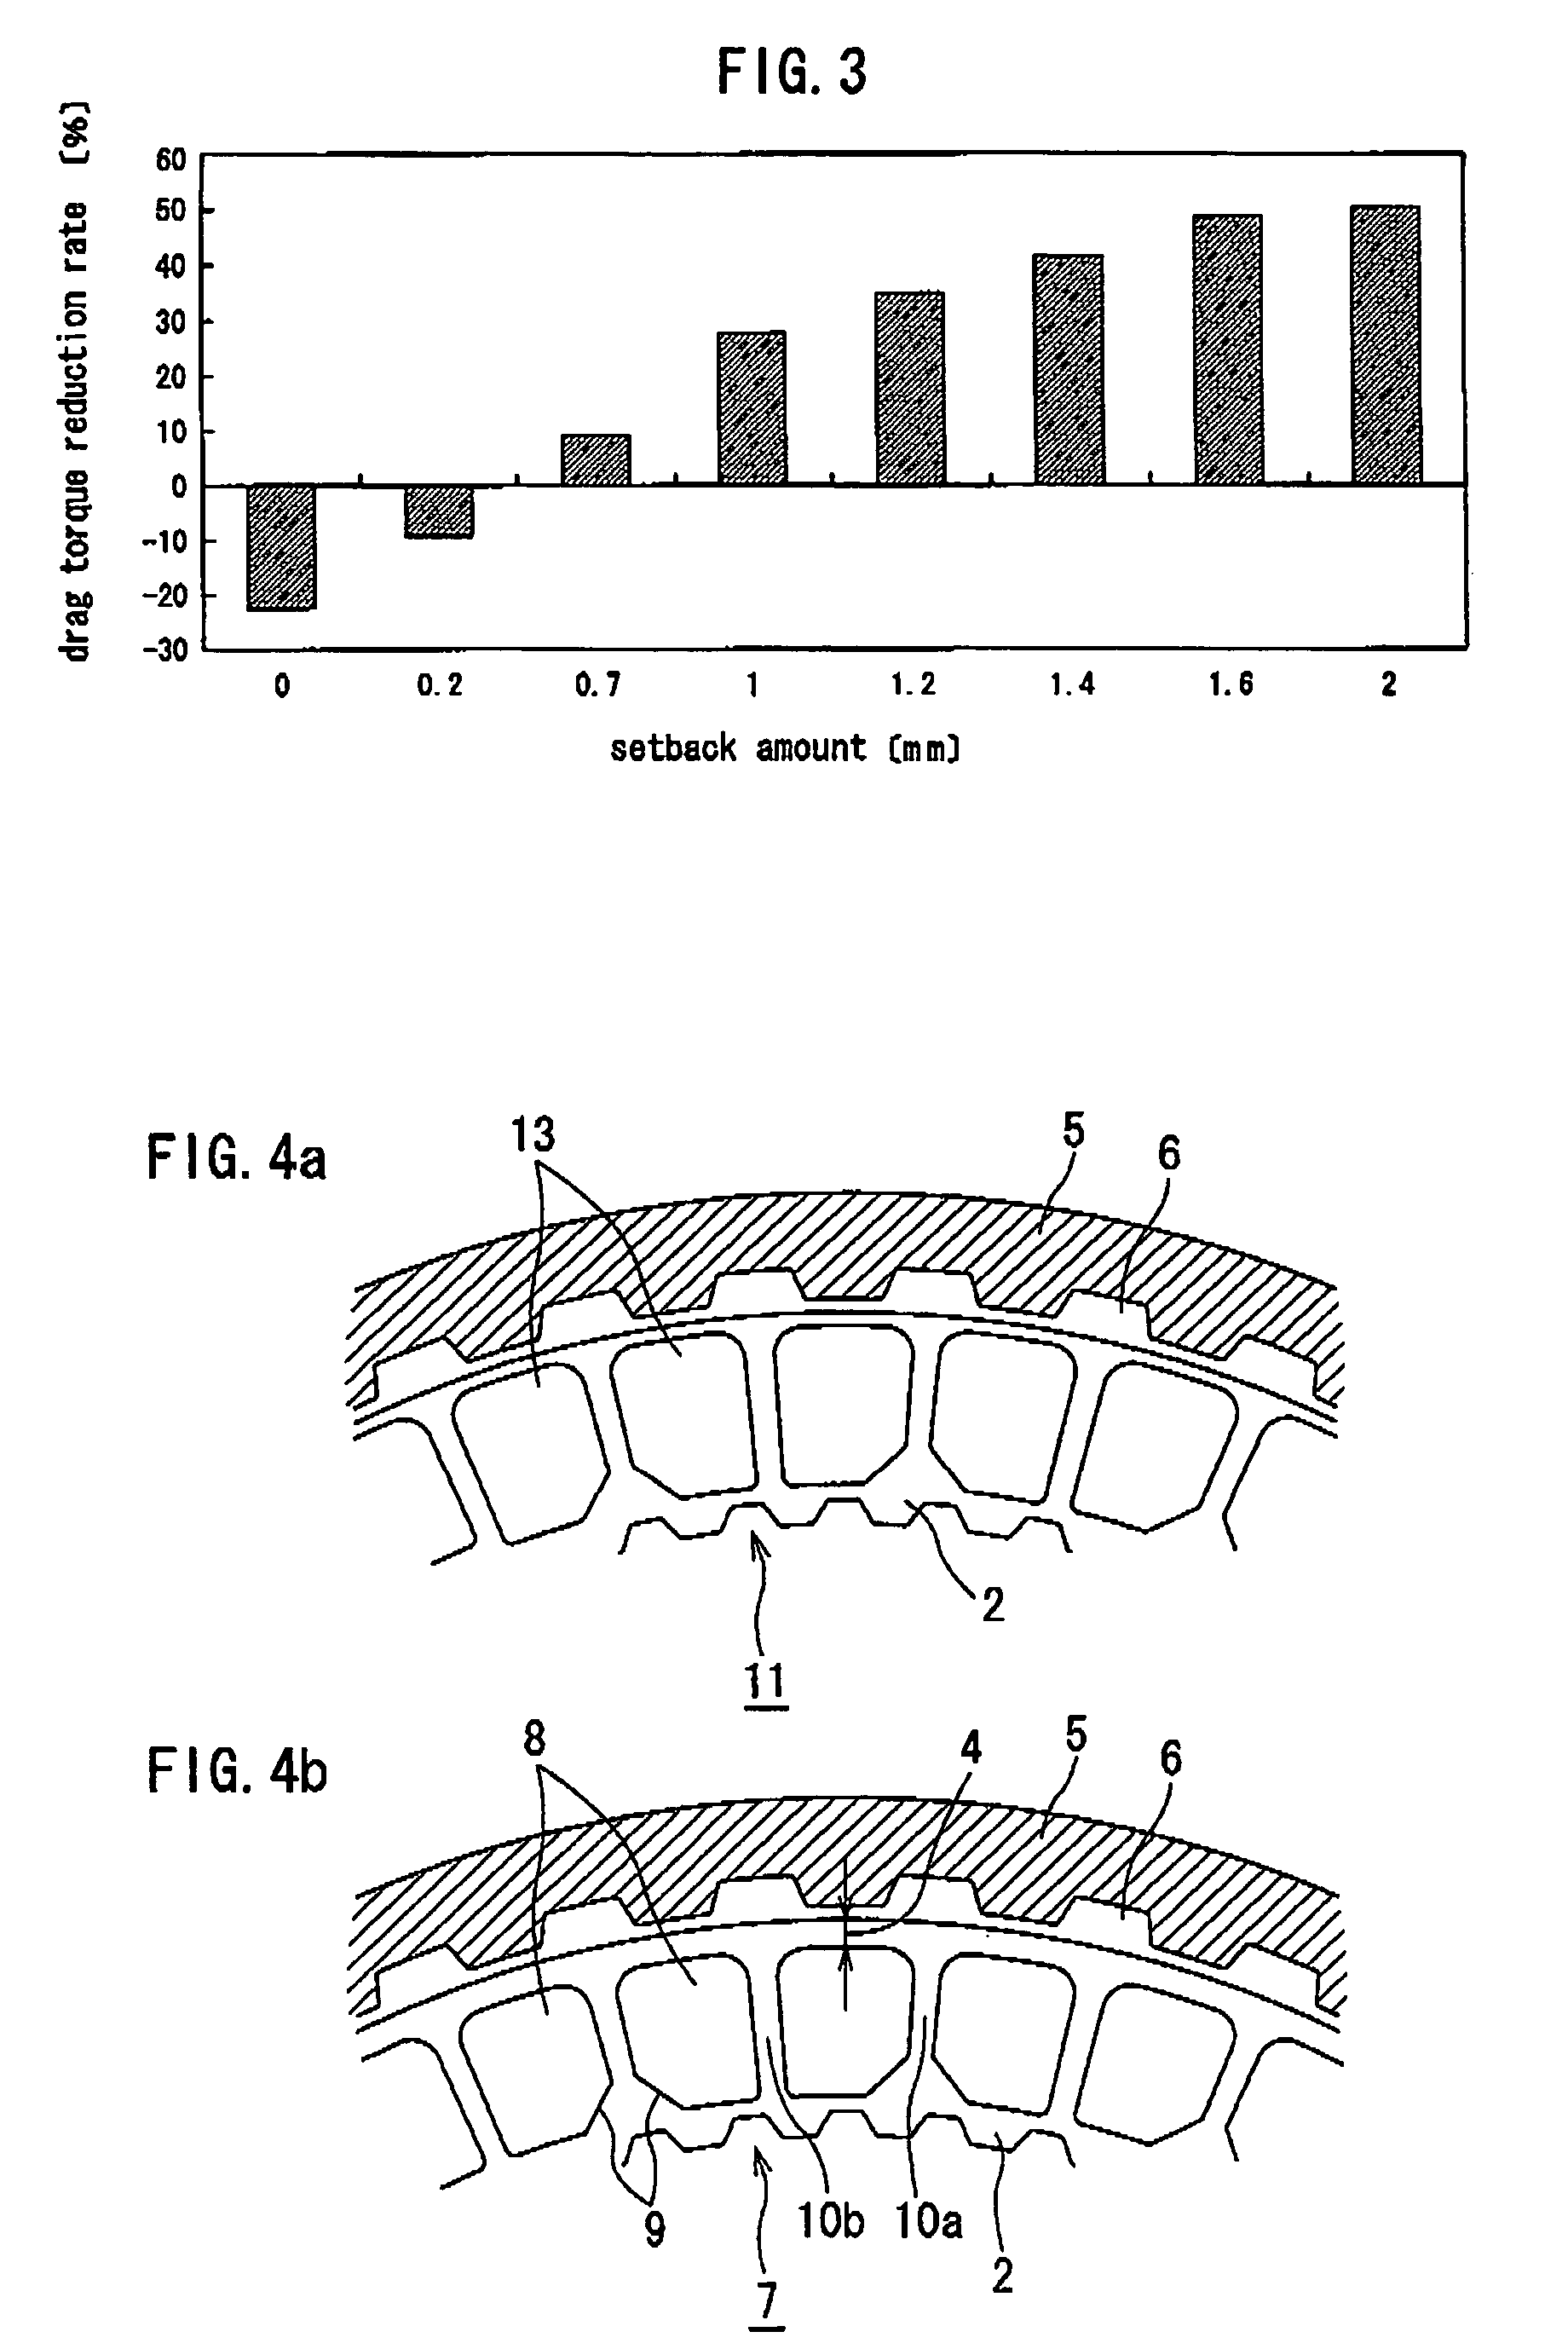 Segment-type friction material